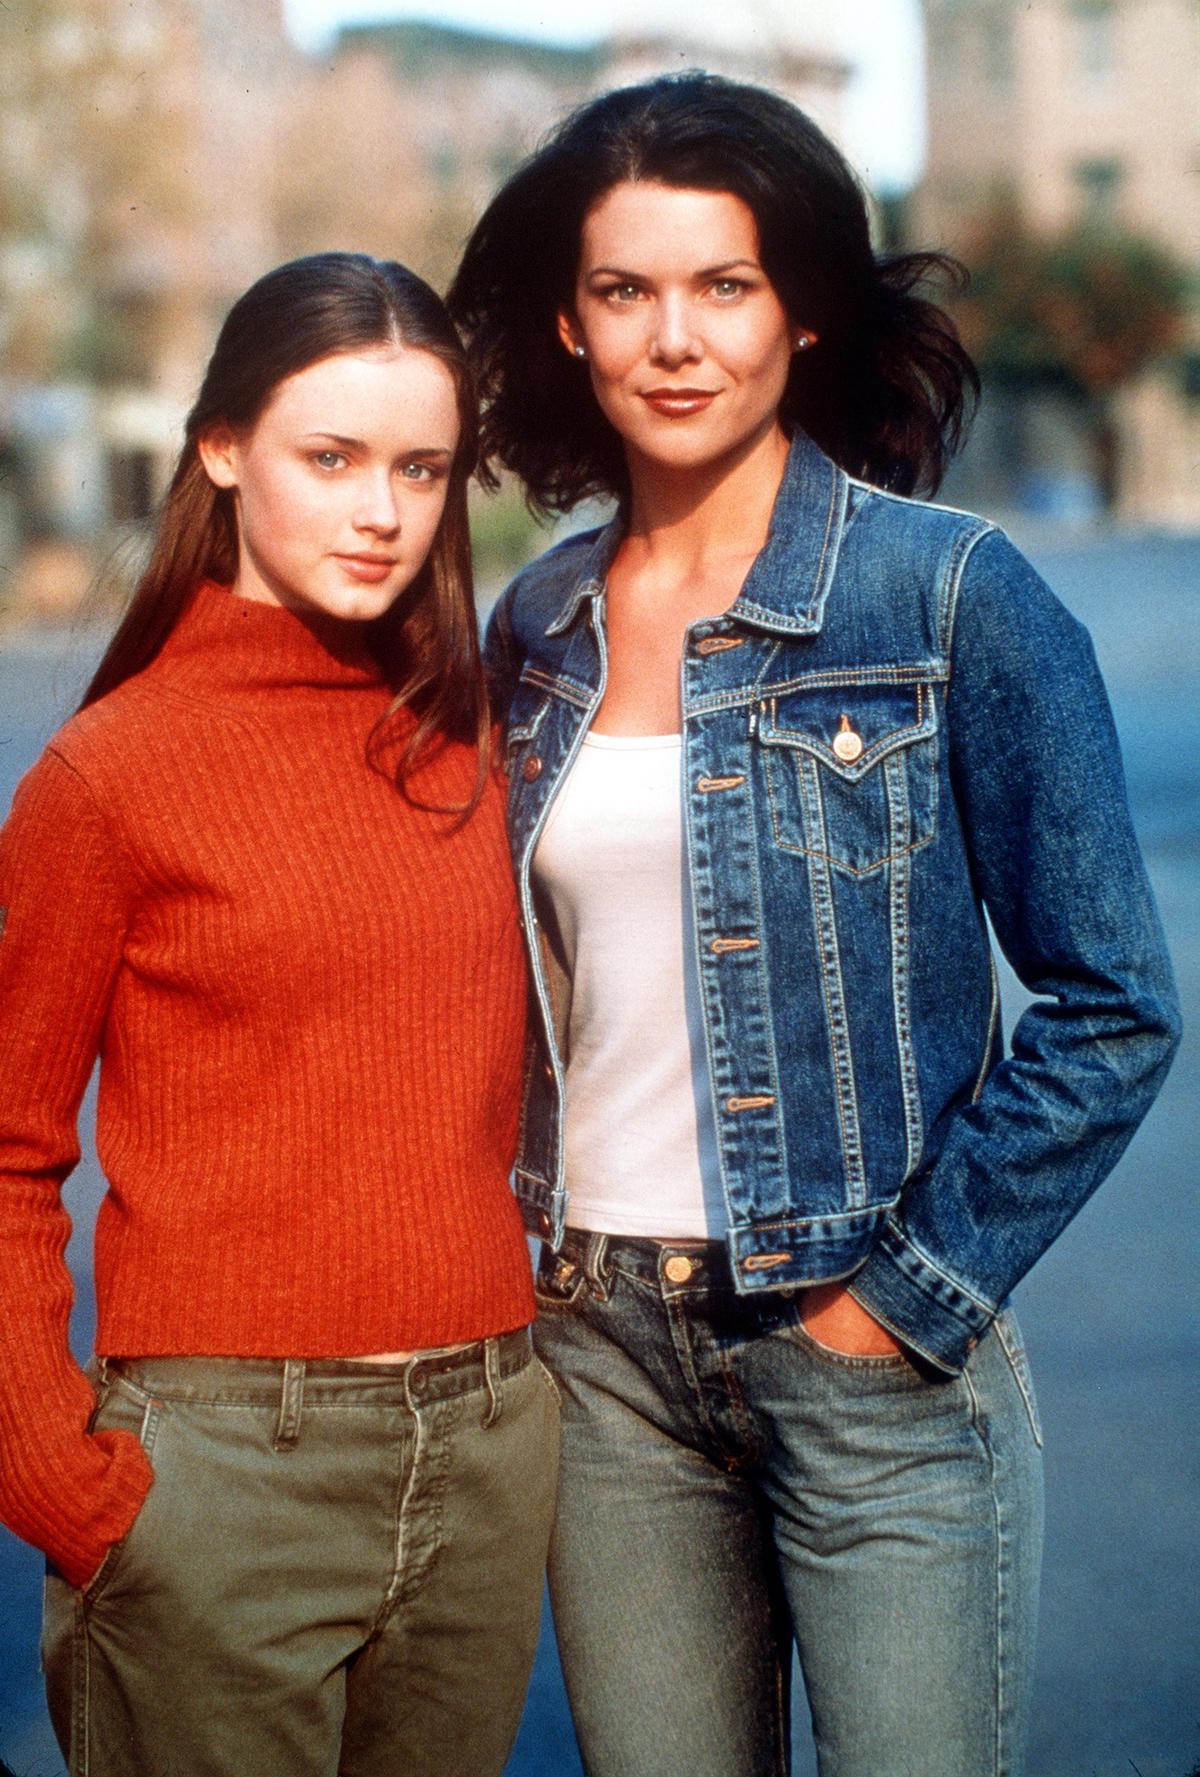 Alexis Bledel and Lauren Graham as Rory and Lorelai Gilmore